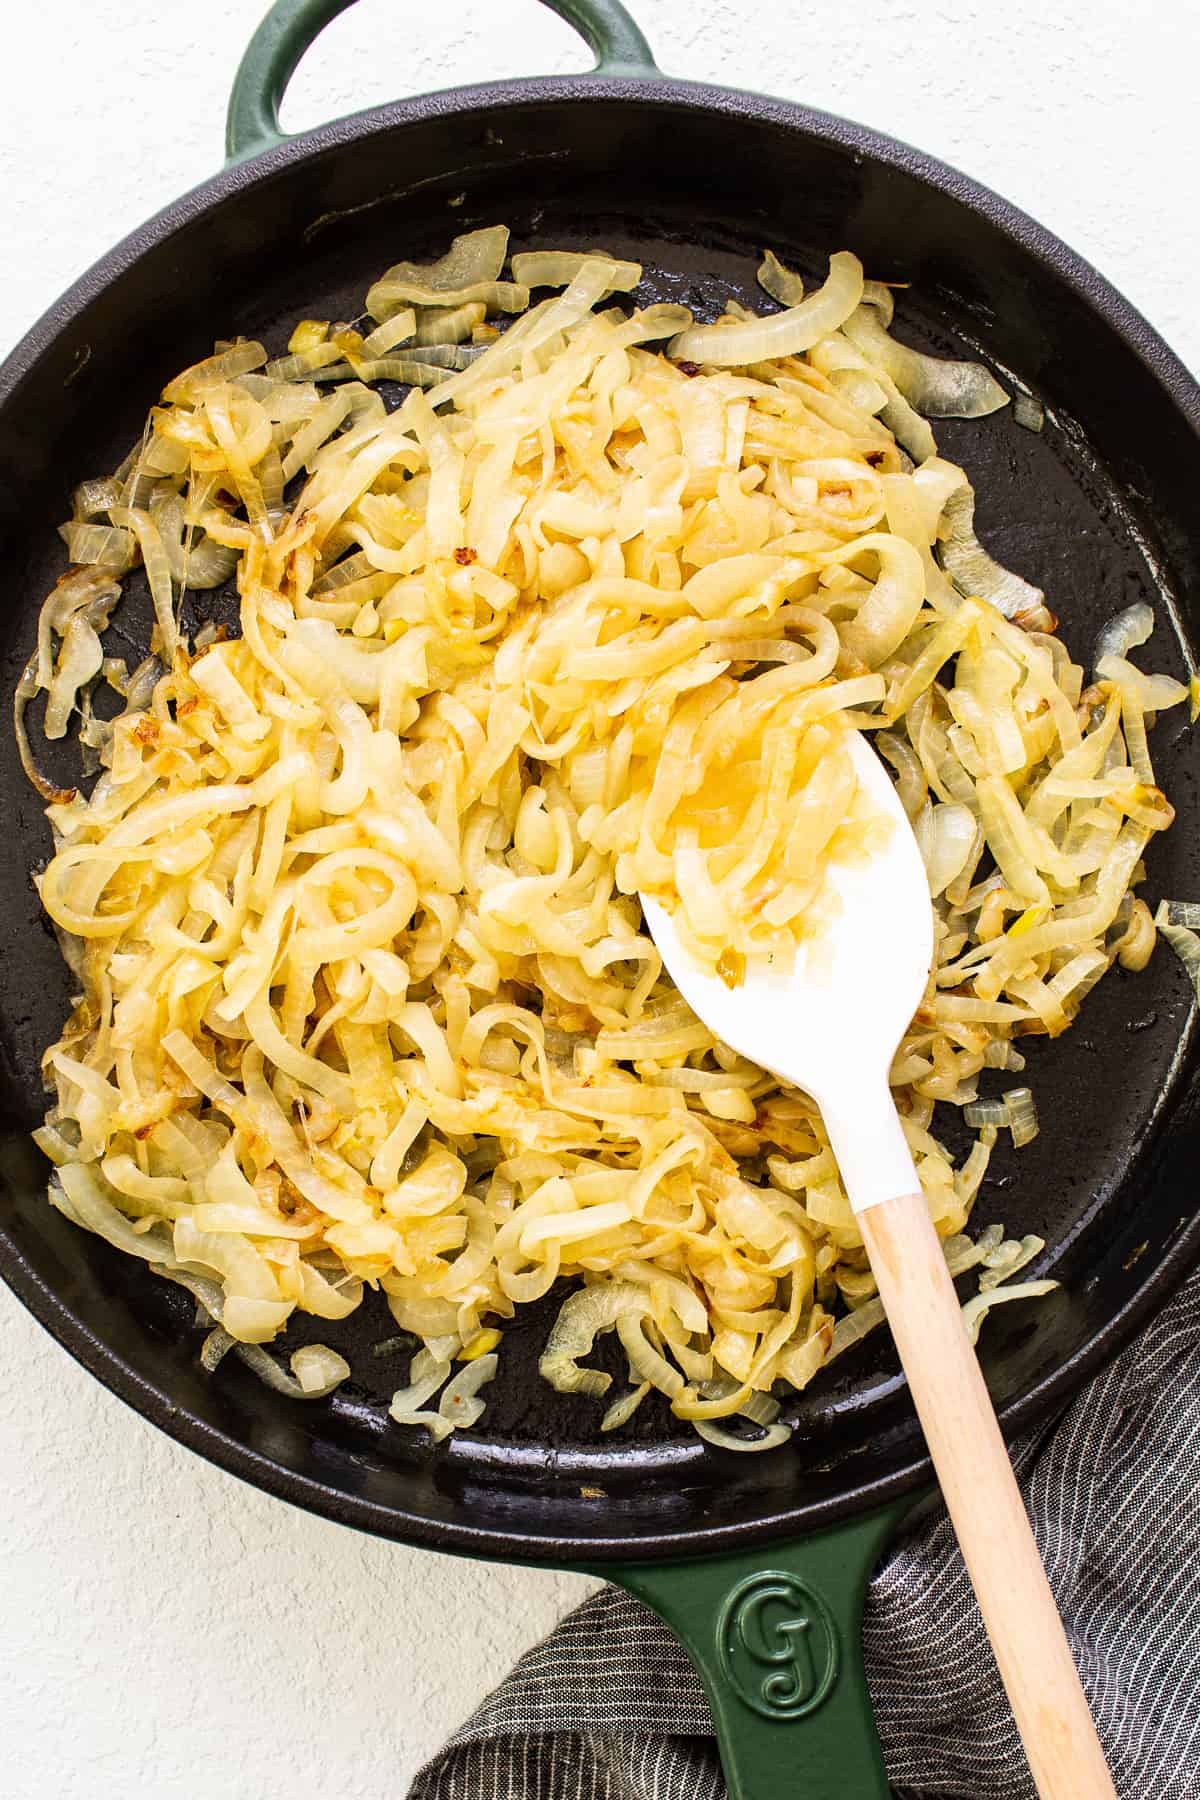 Caramelized onions in a skillet after 30 minutes.